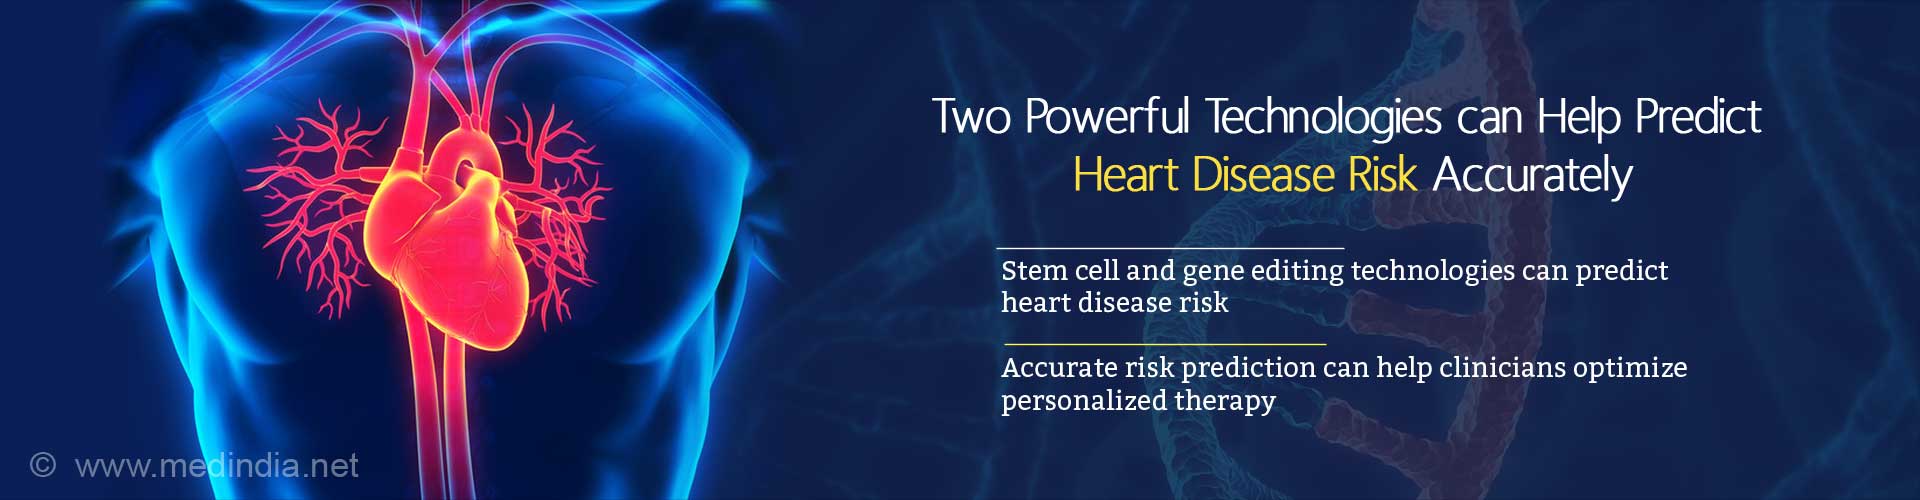 Two powerful technologies can help predict heart disease risk accurately. Stem cell and gene editing technologies can predict heart disease risk. Accurate risk prediction can help clinicians optimize personalized therapy.